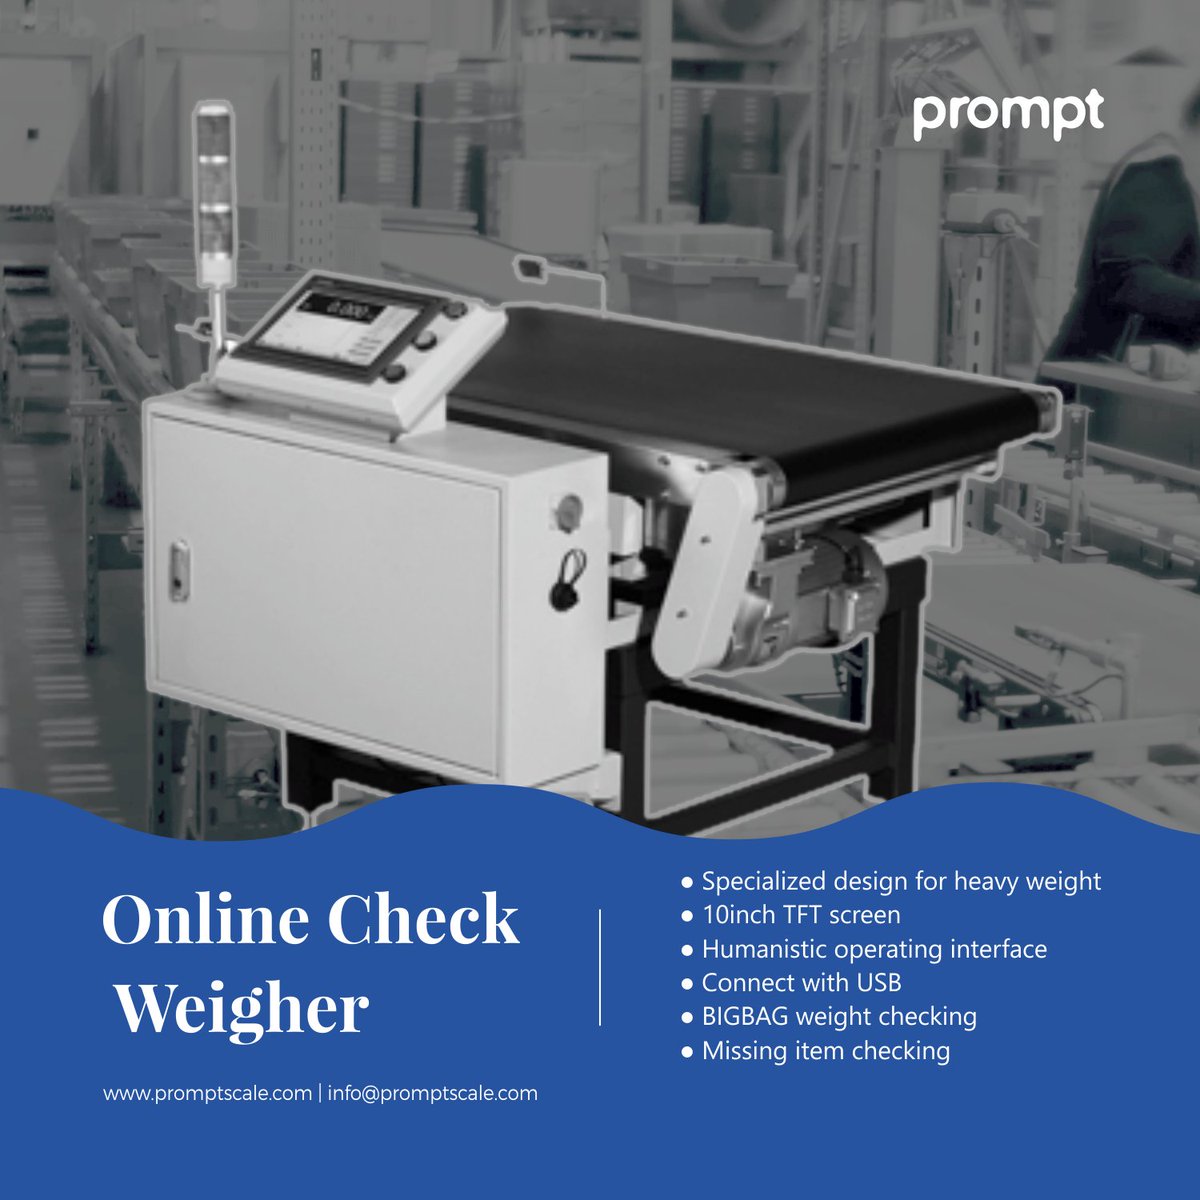 Online Check Weigher: Get accurate and reliable results every time. Get a quote now! bit.ly/PromptScale #WeighingScale #Checkweigher #PromptScale